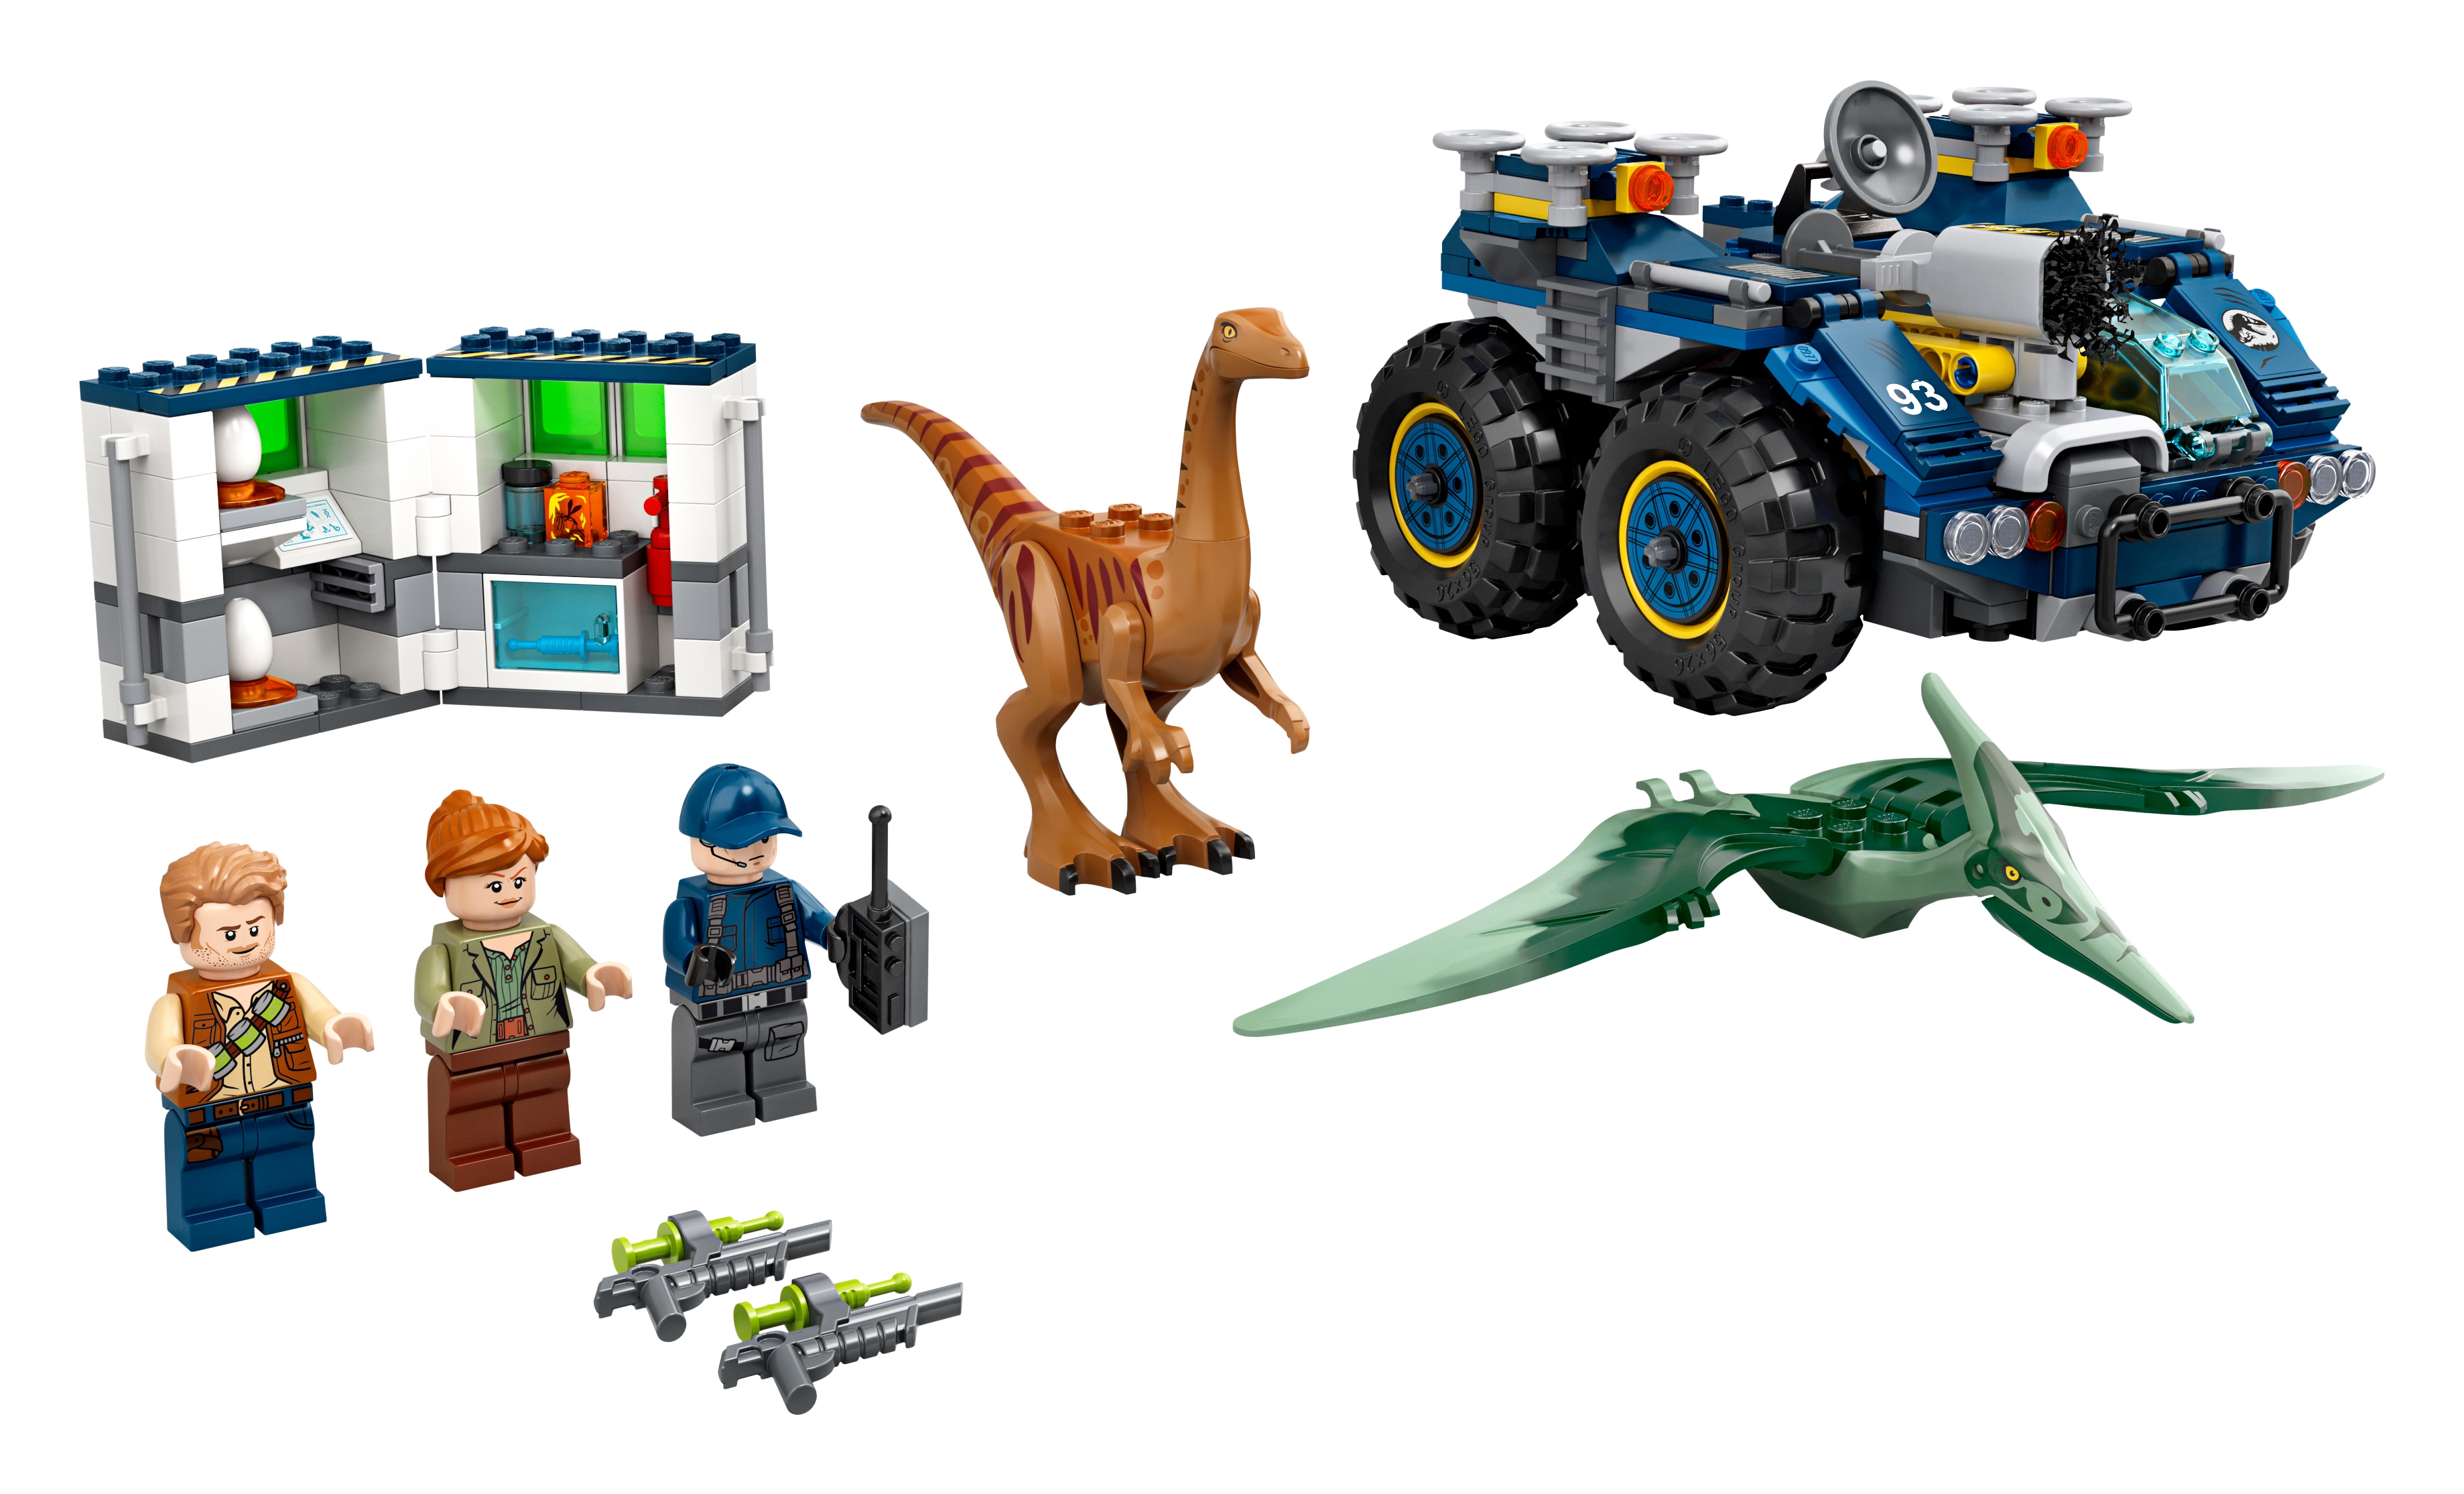 Details about   CLAIRE DEARING 75940 Jurassic World LEGO Minifigure